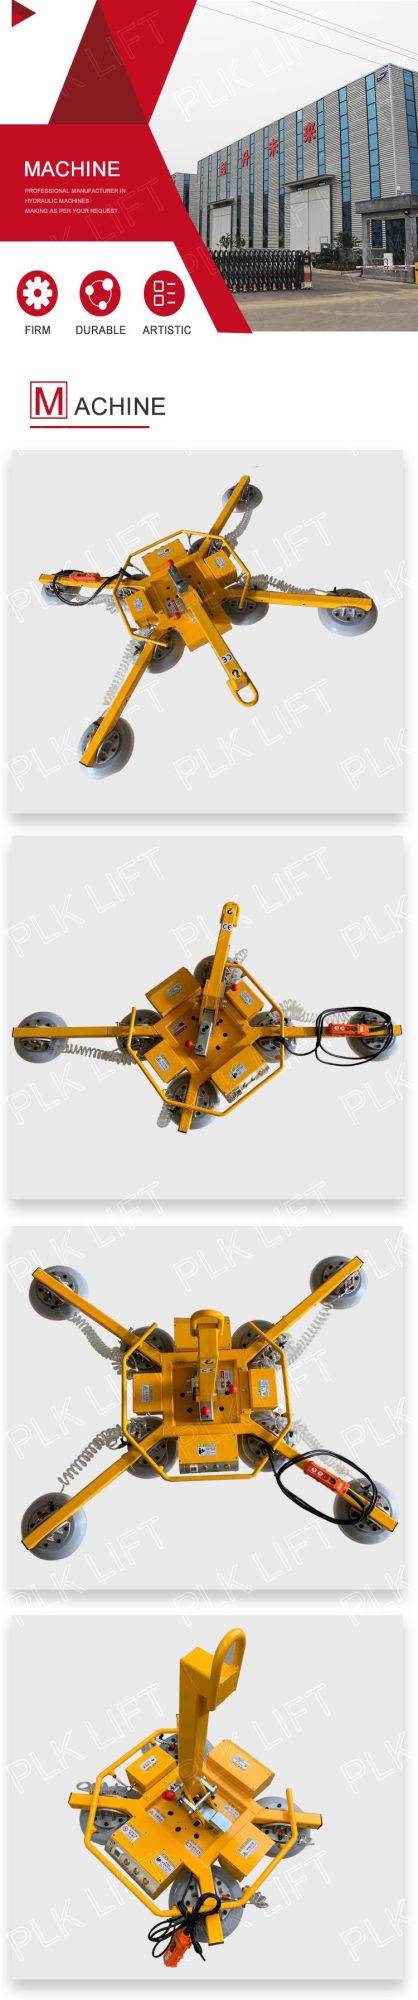 600kg Fast Delivery Glass Robot with 6 Suction Cups